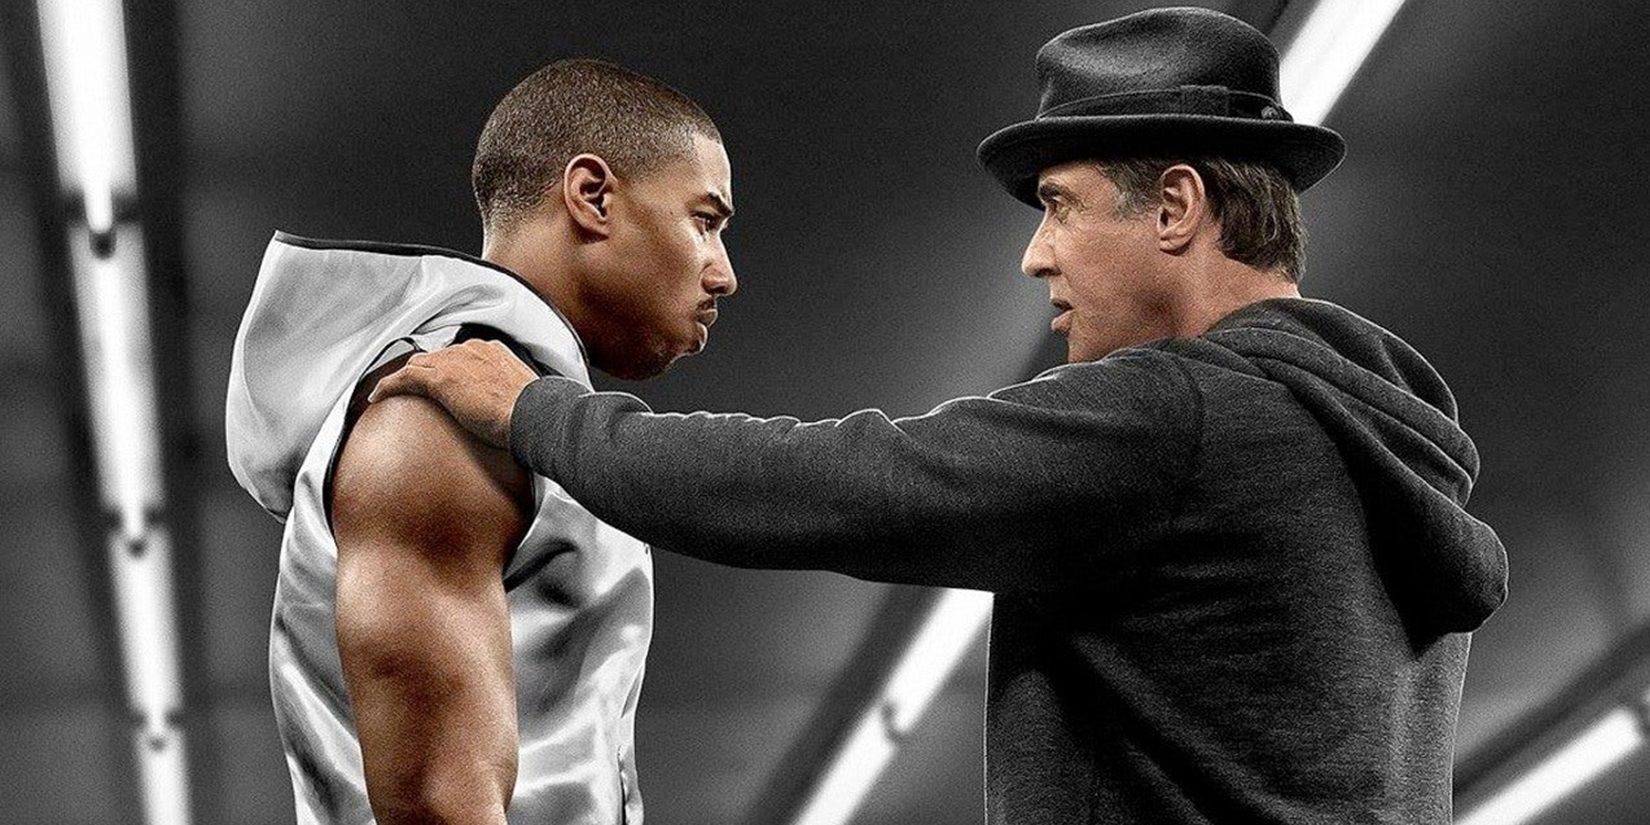 Sylvester Stallone as Rocky comforting Michael B. Jordan as Donnie in Creed